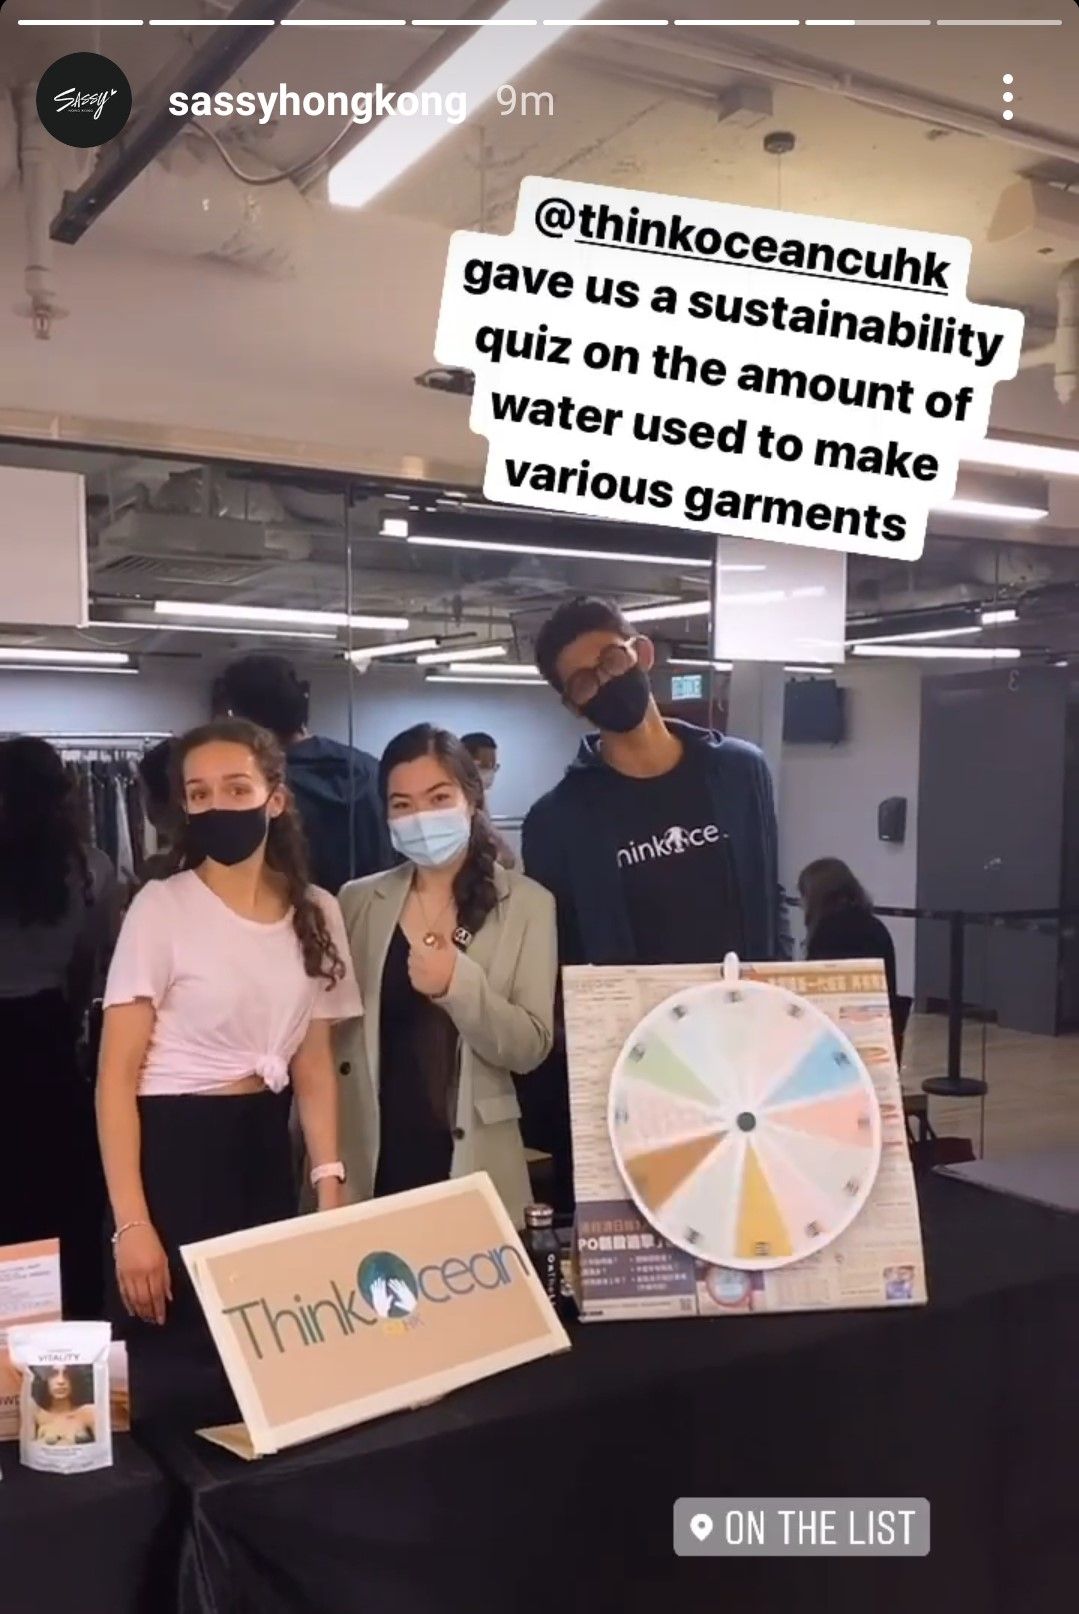 Serag and his team put together an educational booth during a second-hand clothes pop-up on the environmental impact of garments. Credit: Sassy Hong Kong.